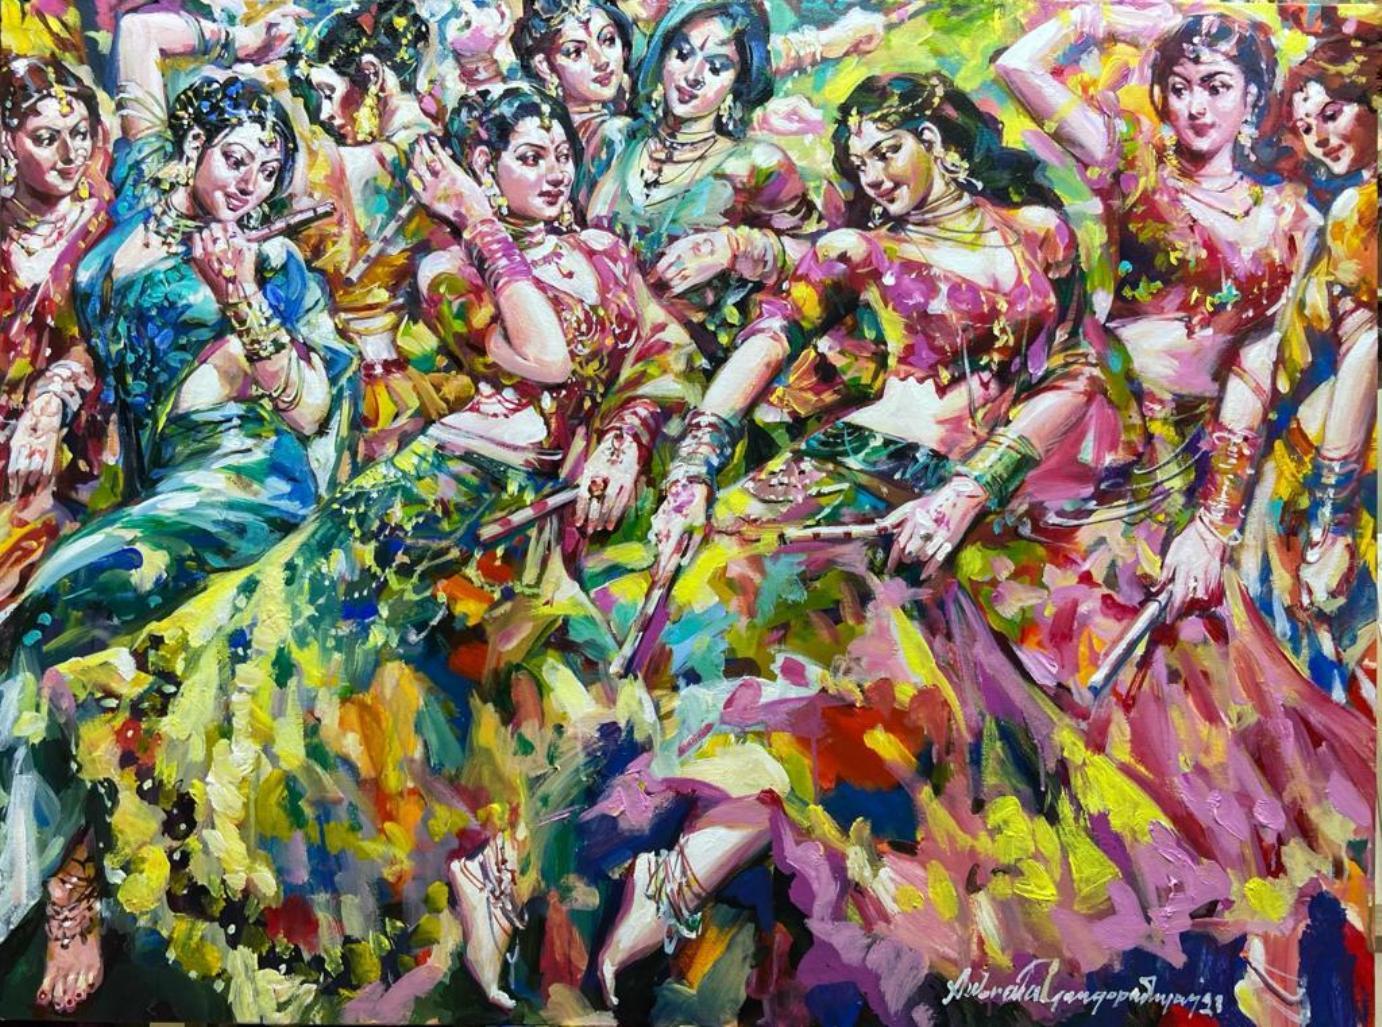 Subrata Gangopadhayay Figurative Painting - Dandia Raas, Festival, Acrylic on Canvas by Contemporary Artist "In Stock"